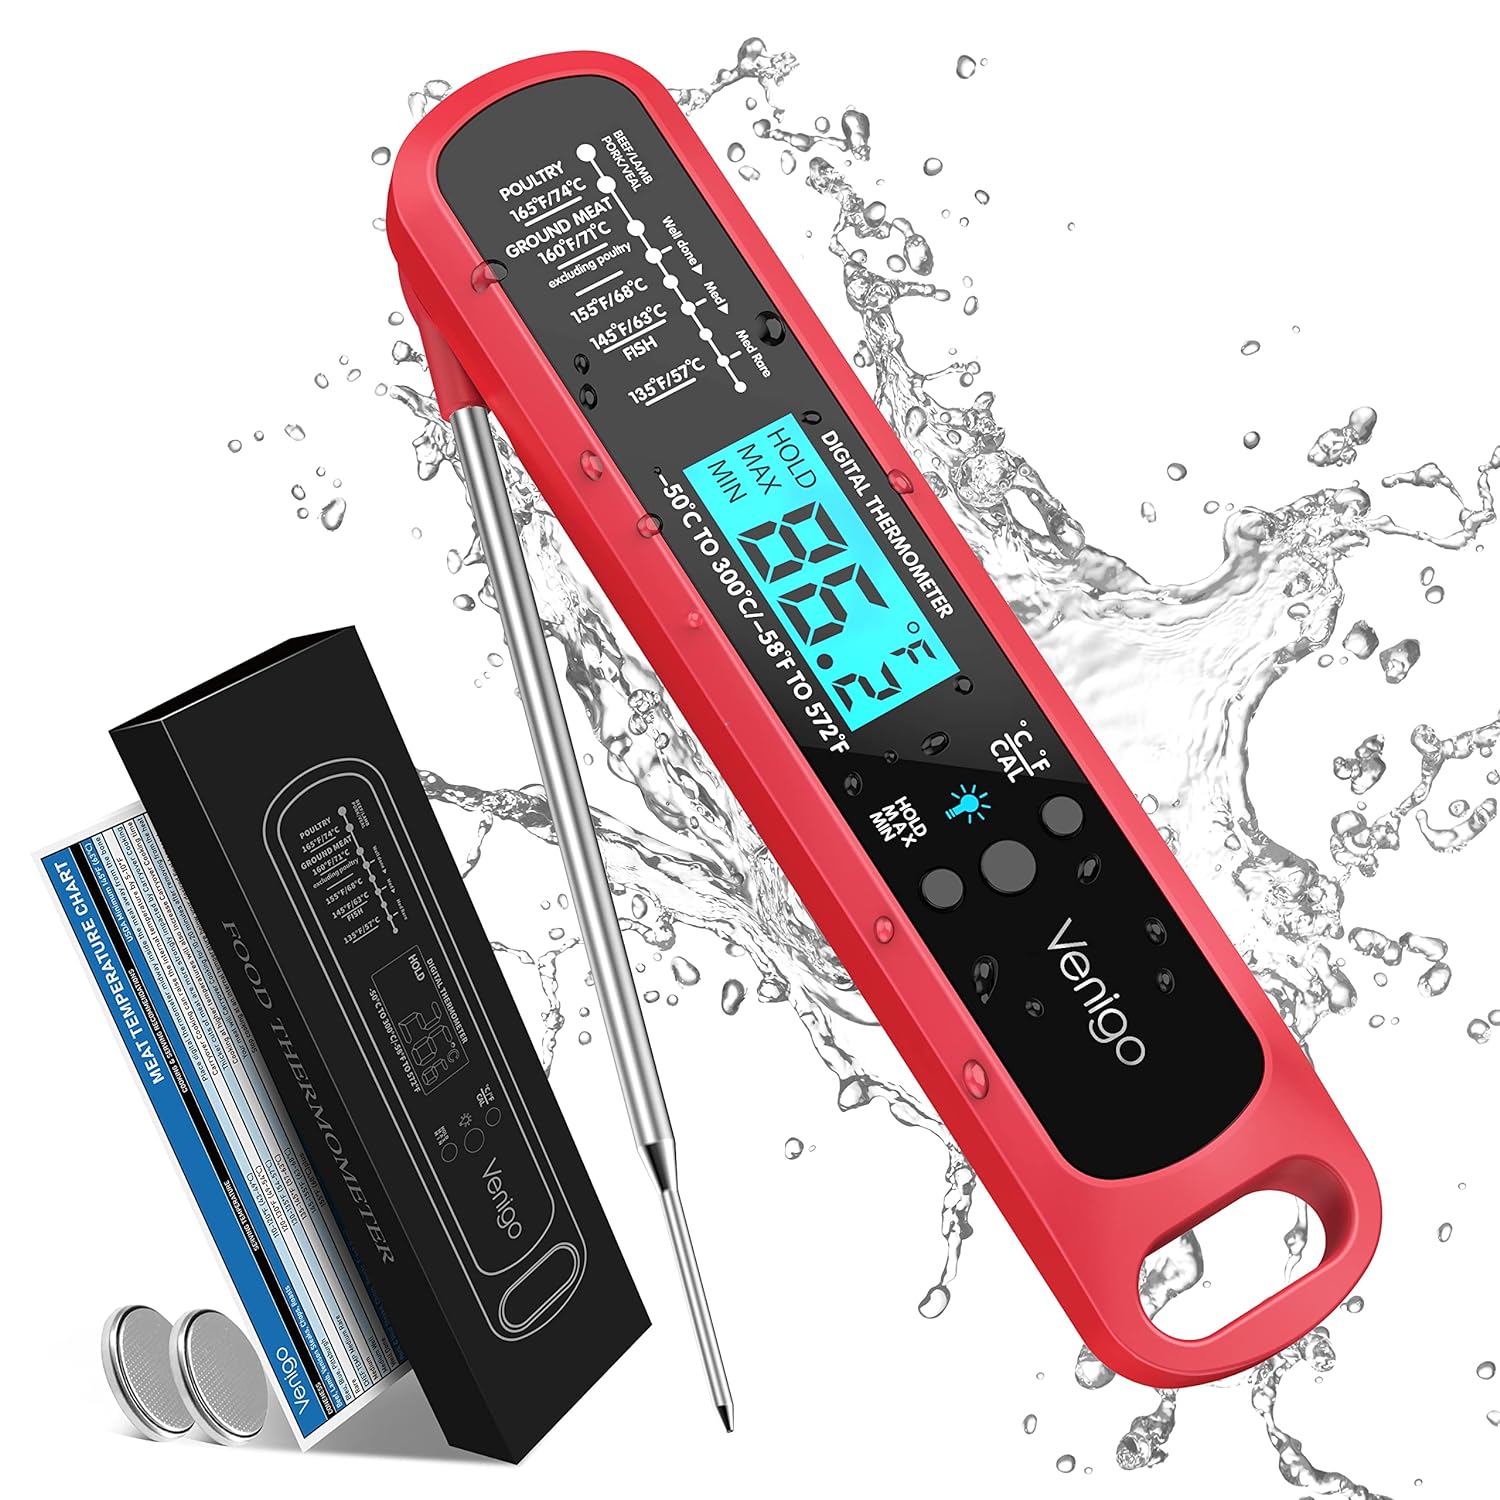 Venigo Digital Meat and Food Thermometer for Cooking and Grilling, Waterproof Instant-Read Cooking Thermometer, Kitchen Probe Thermometer for Baking, Roasting, Smoking, Deep Frying (Red)